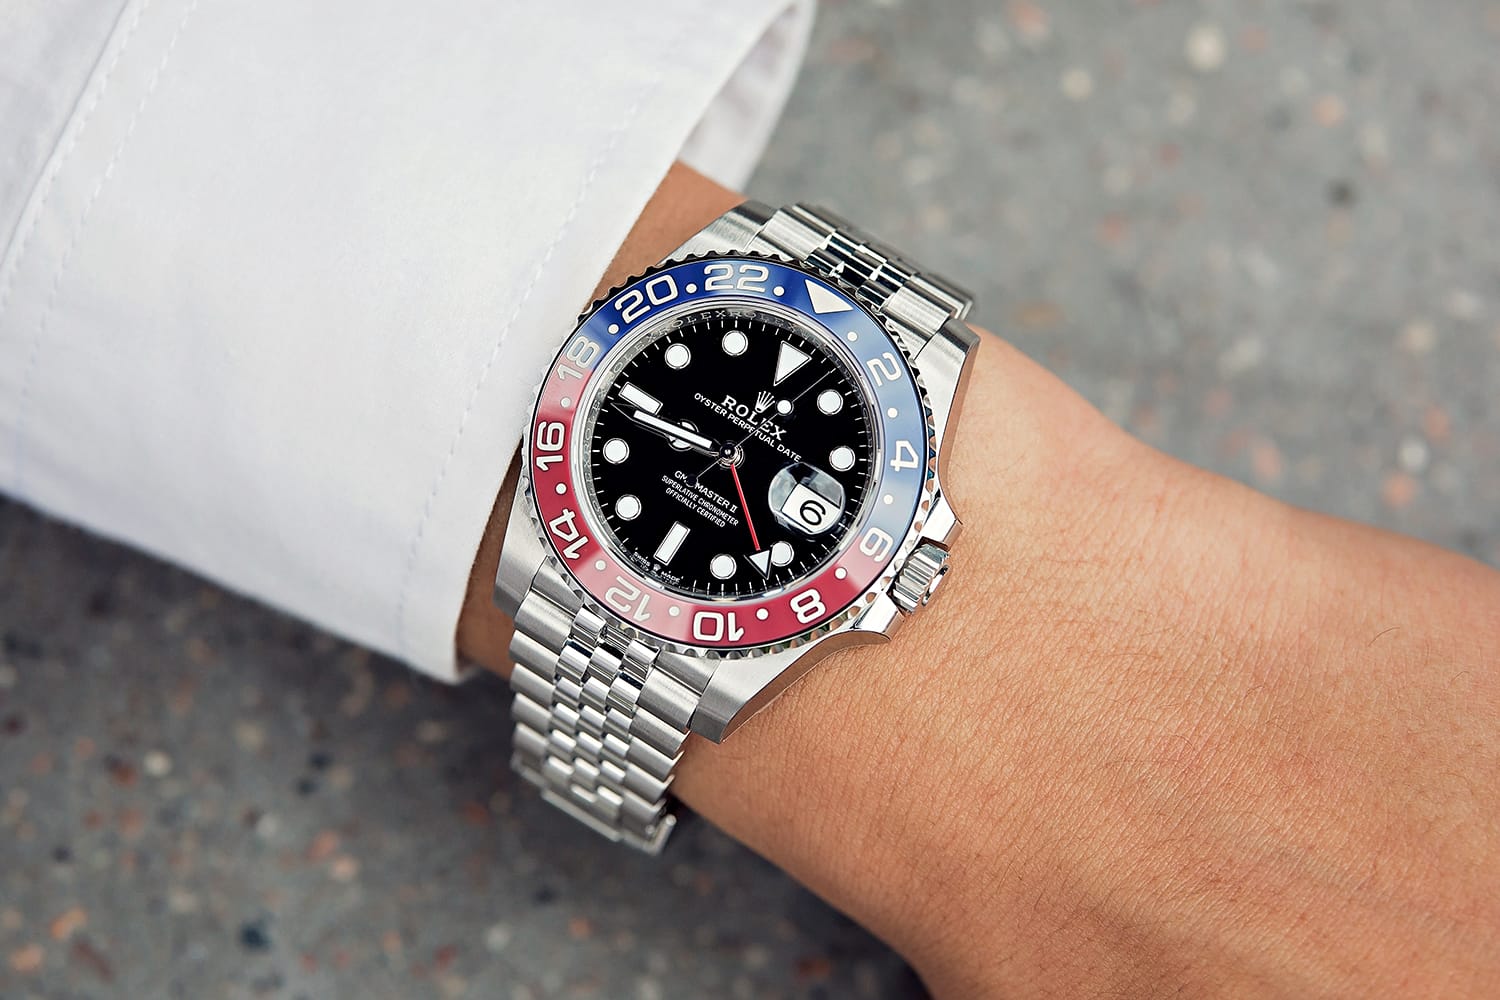 Here Are The Top Rolex Watches of 2019 